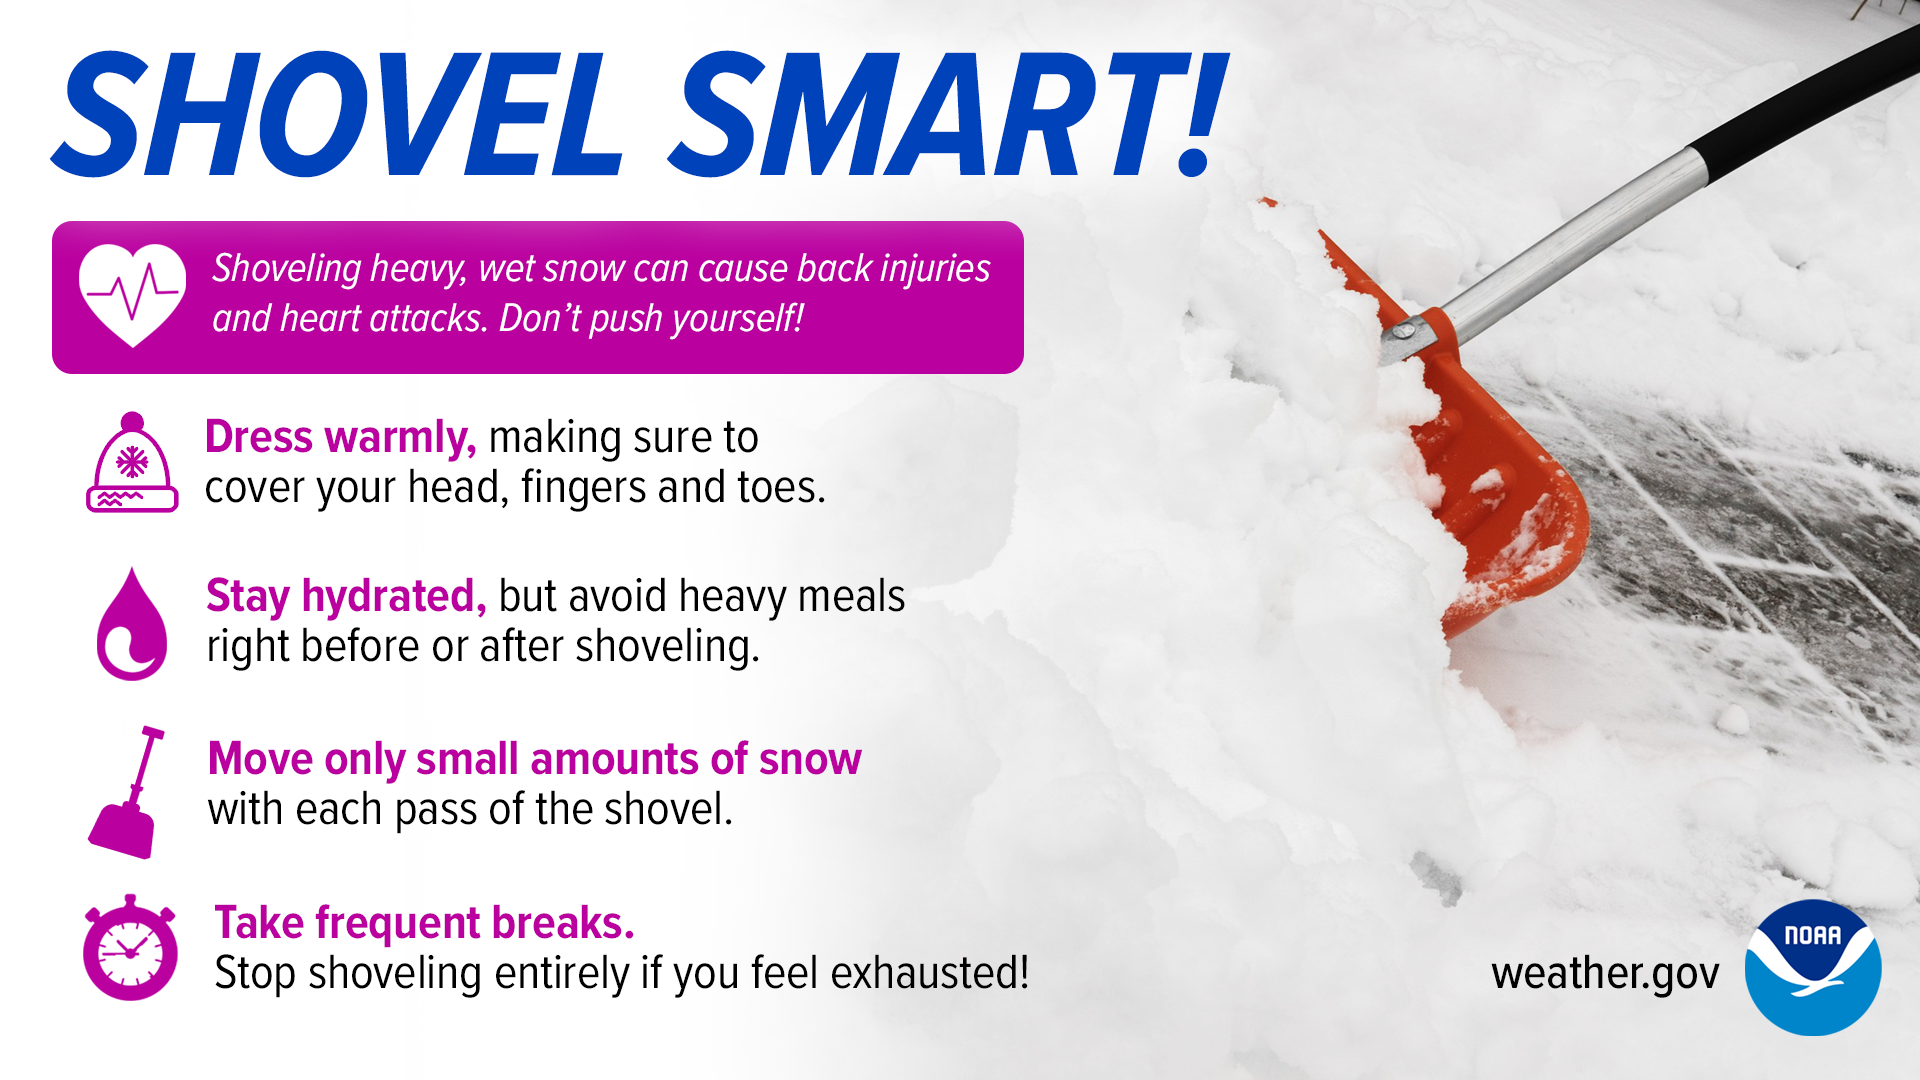 Shovel smart! Shoveling heavy, wet snow can cause back injuries and heart attacks. Don’t push yourself! Dress warmly, making sure to cover your head, fingers and toes. Stay hydrated, but avoid heavy meals right before or after shoveling. Move only small amounts of snow with each pass of the shovel. Take frequent breaks. Stop shoveling entirely if you feel exhausted!